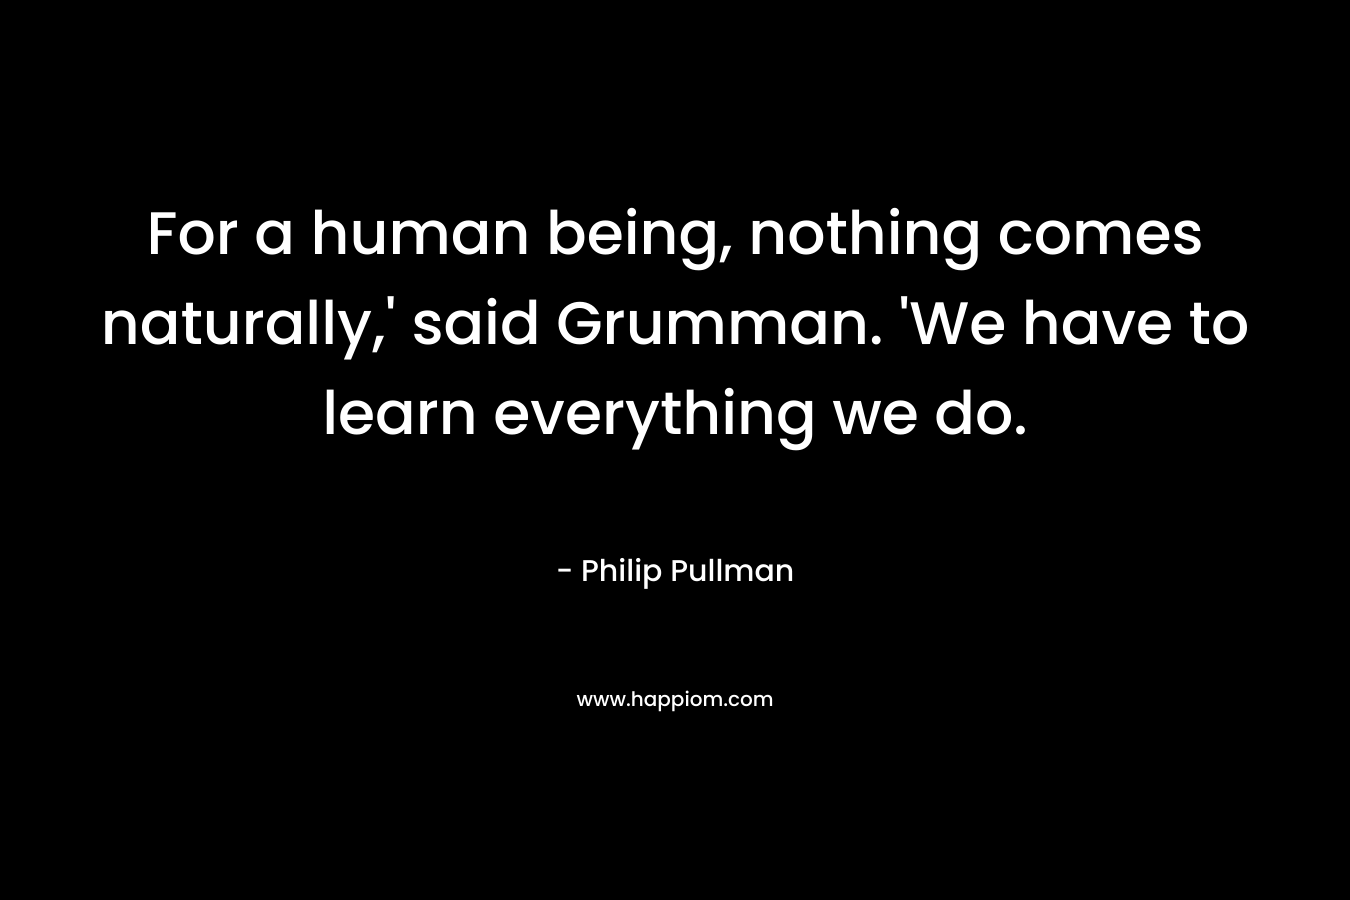 For a human being, nothing comes naturally,’ said Grumman. ‘We have to learn everything we do. – Philip Pullman